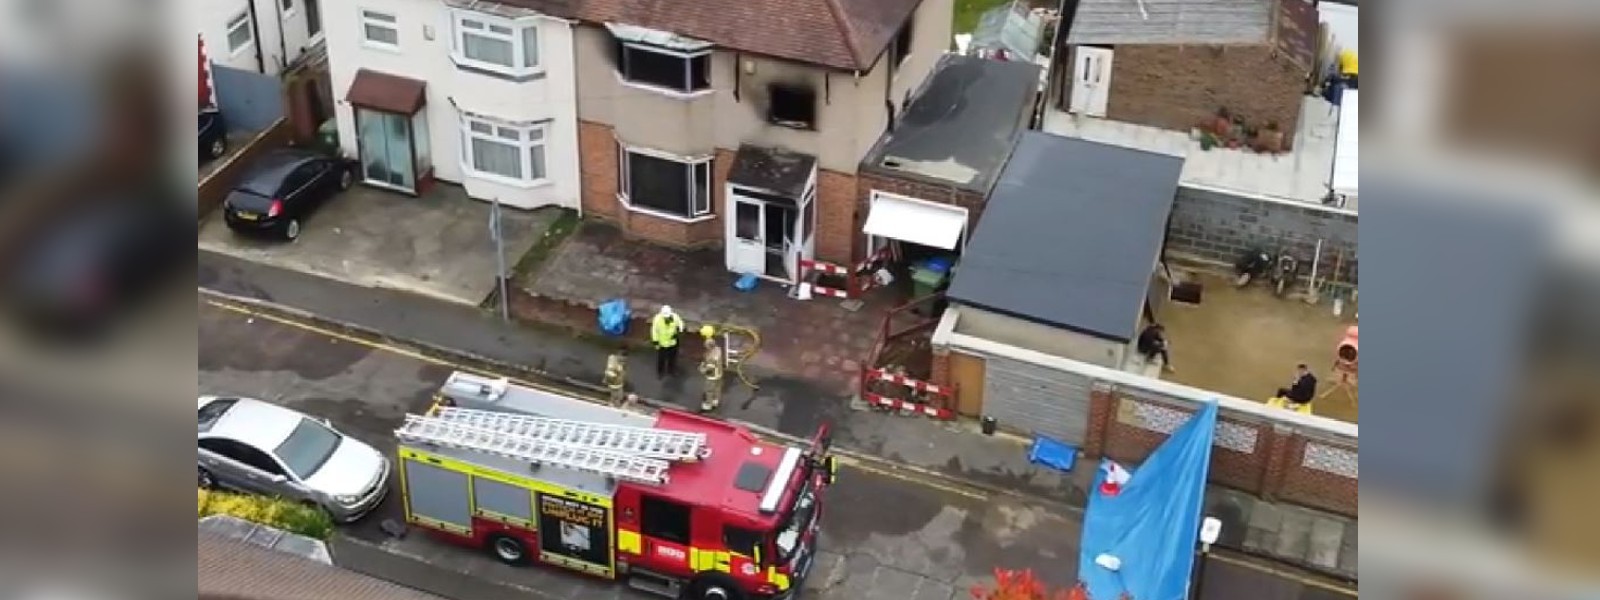 Four Lankans dead due to house fire in London